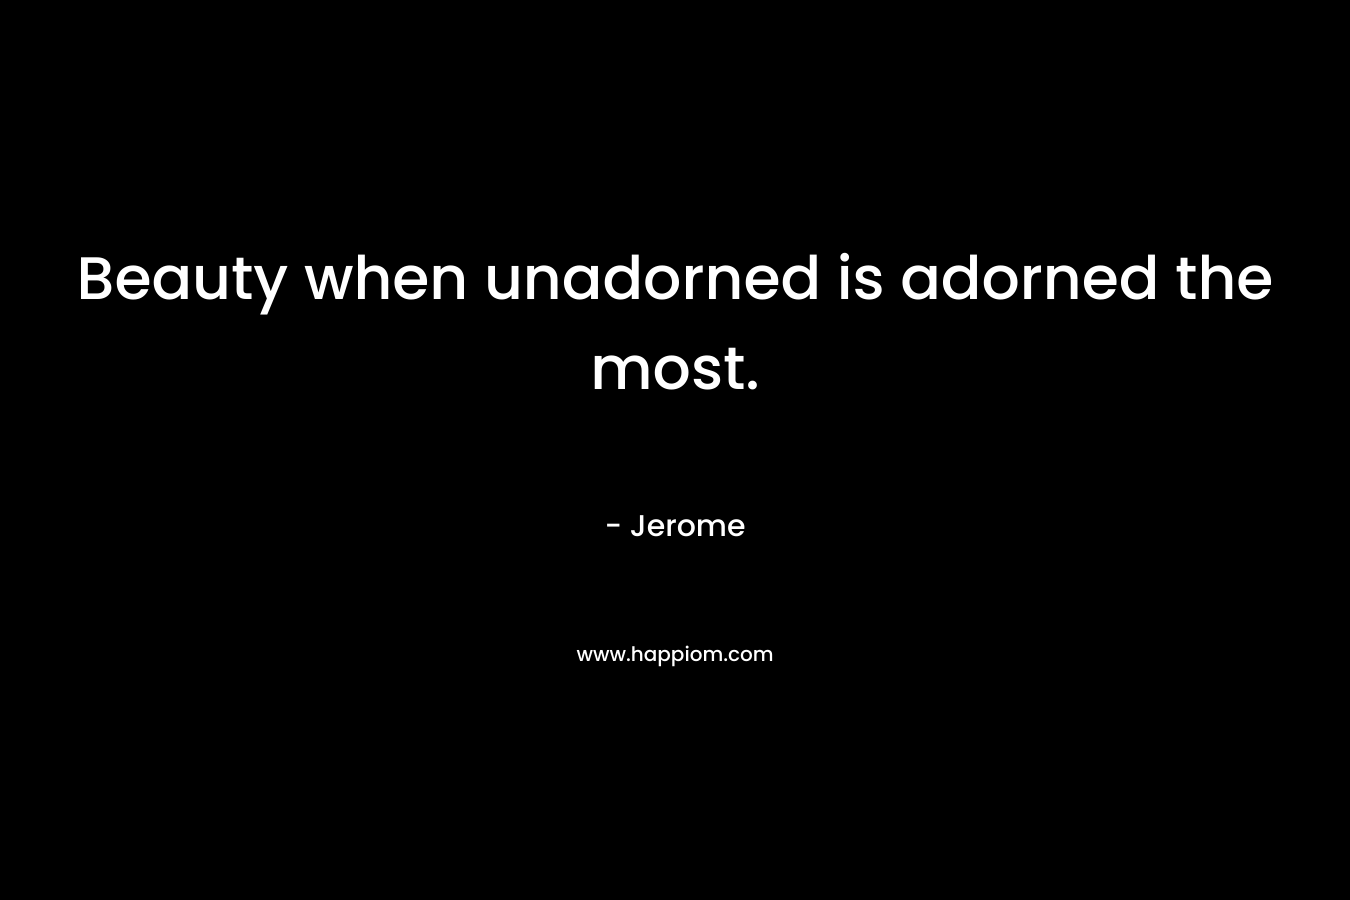 Beauty when unadorned is adorned the most.